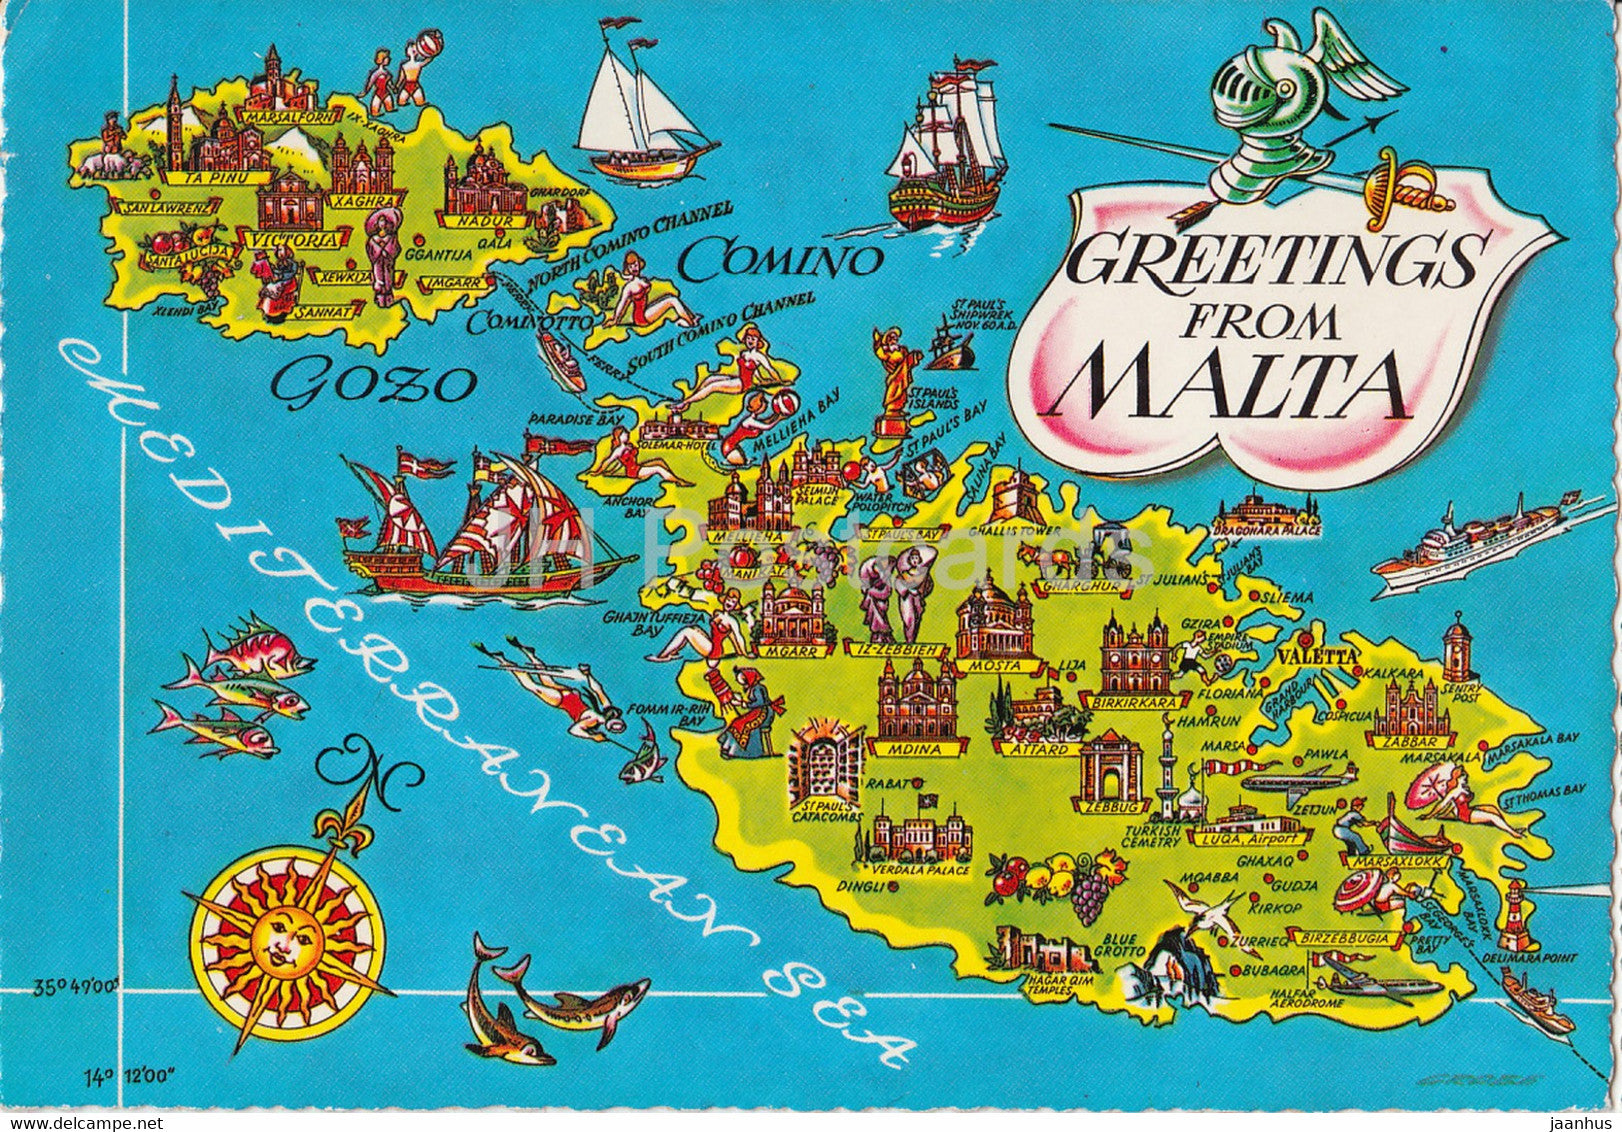 Greetings from Malta - map - 1980 - Malta - used - JH Postcards